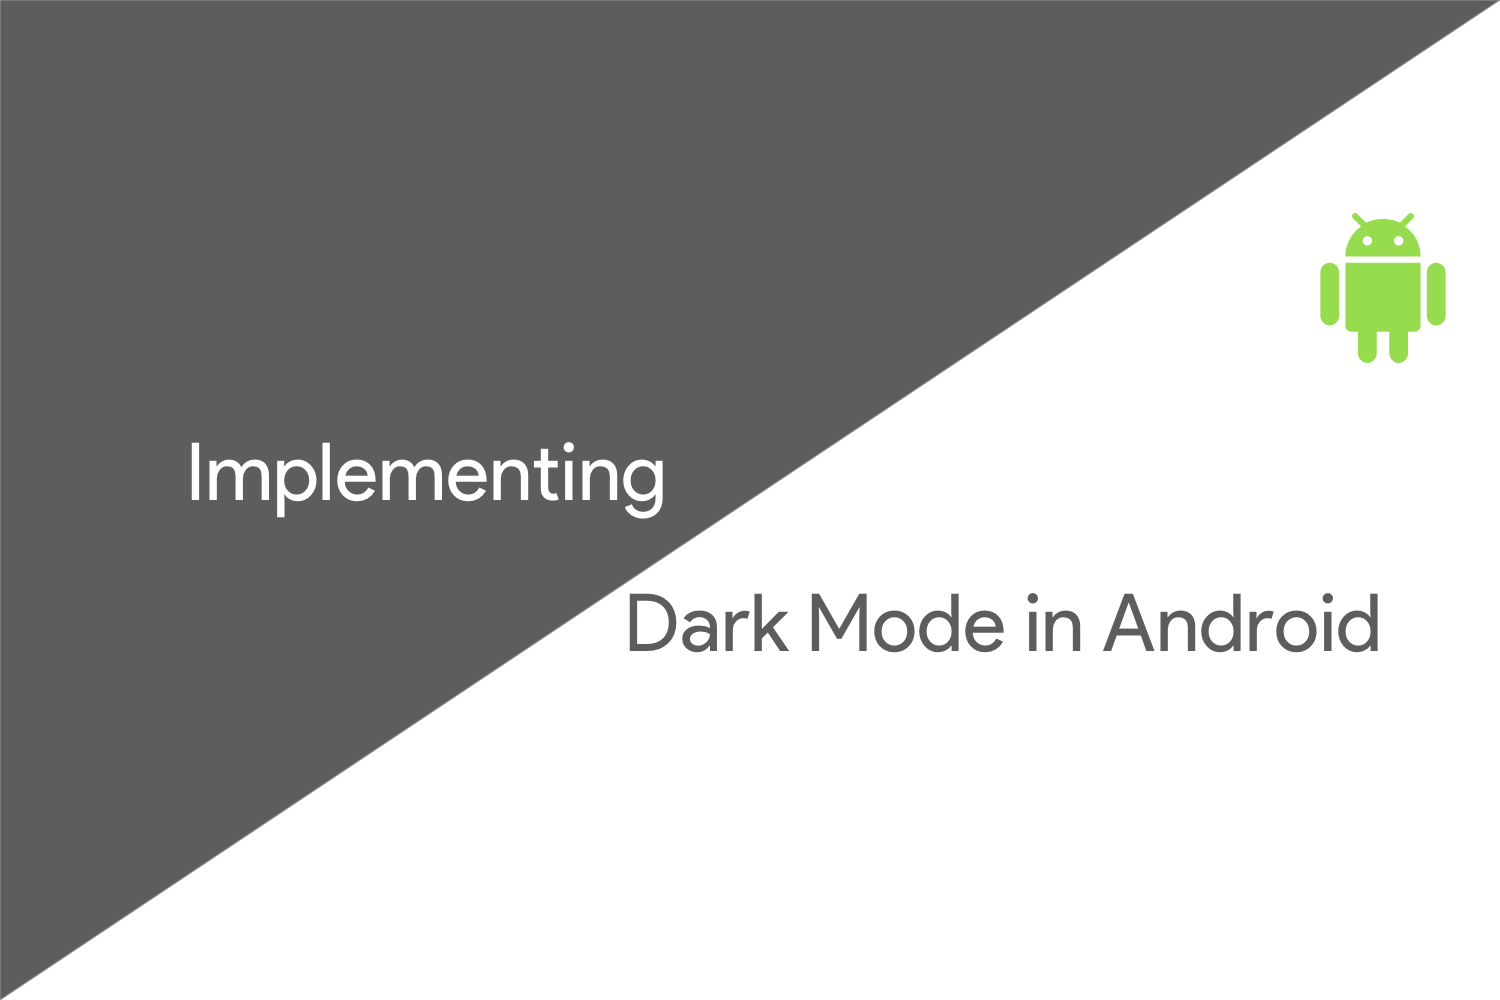 Implementing Dark Mode Theme in Android